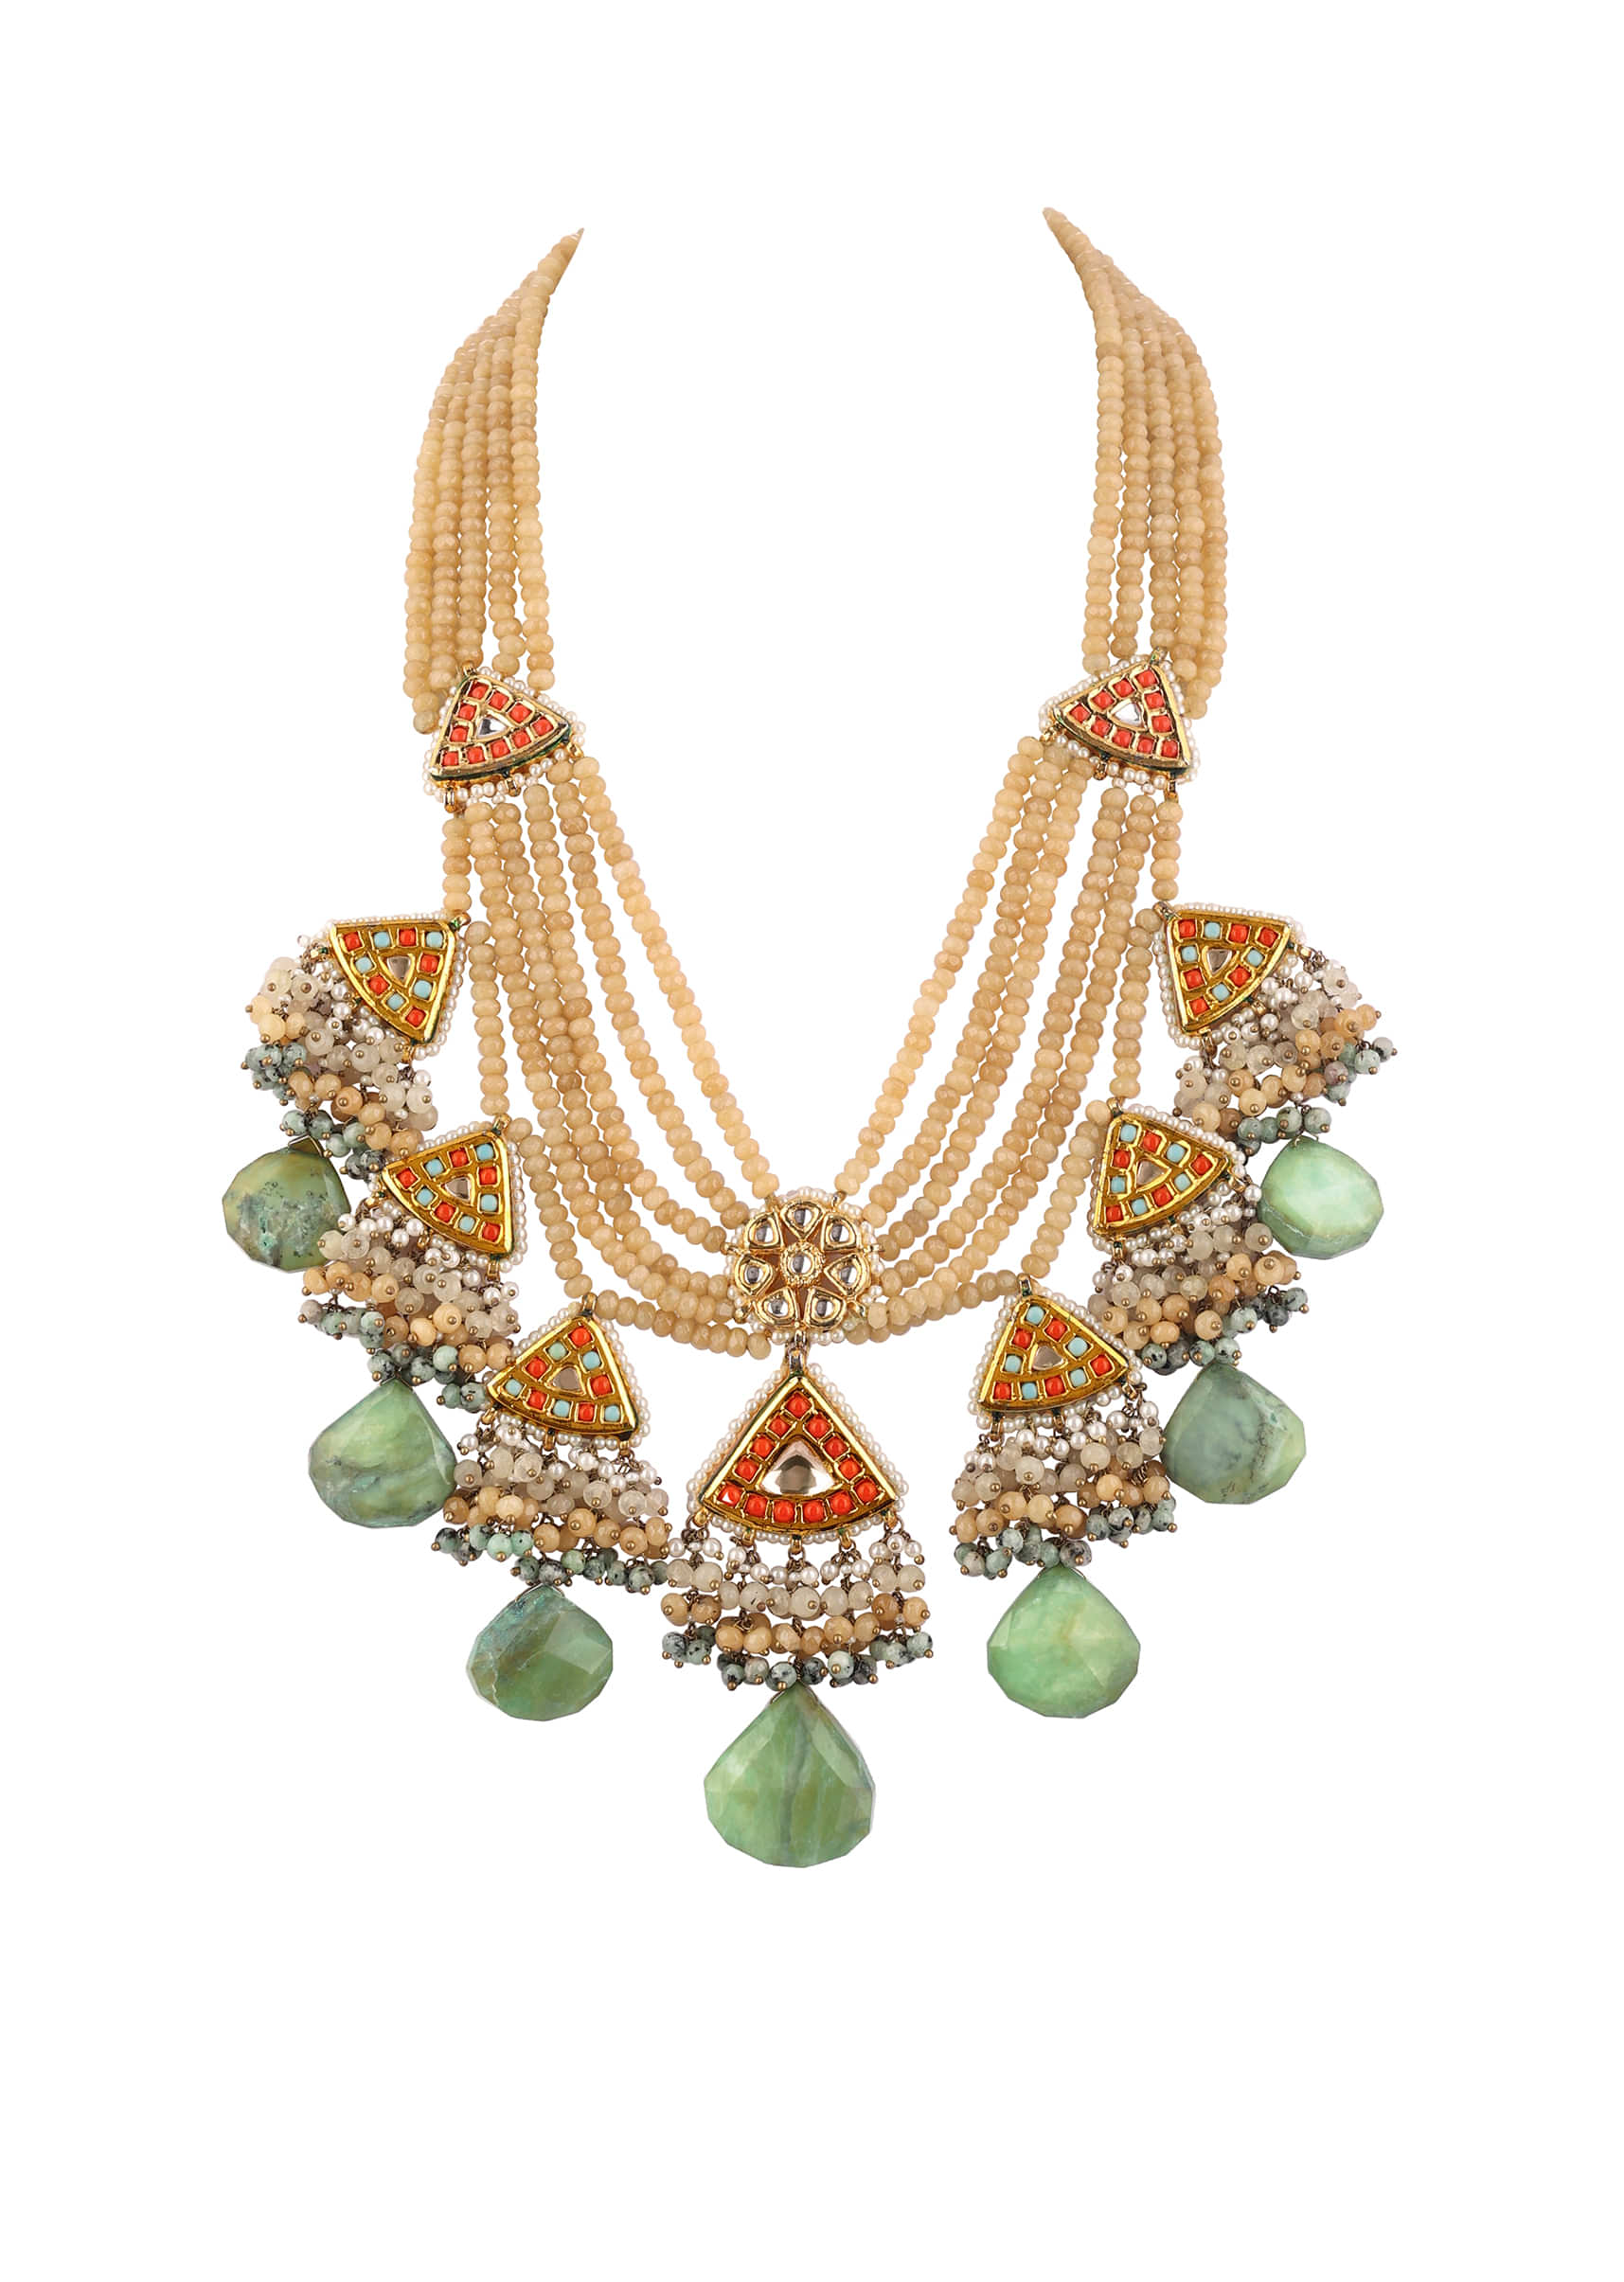 Earthy Beaded Necklace With Multi Colored Stones And Dangling Green Drops 